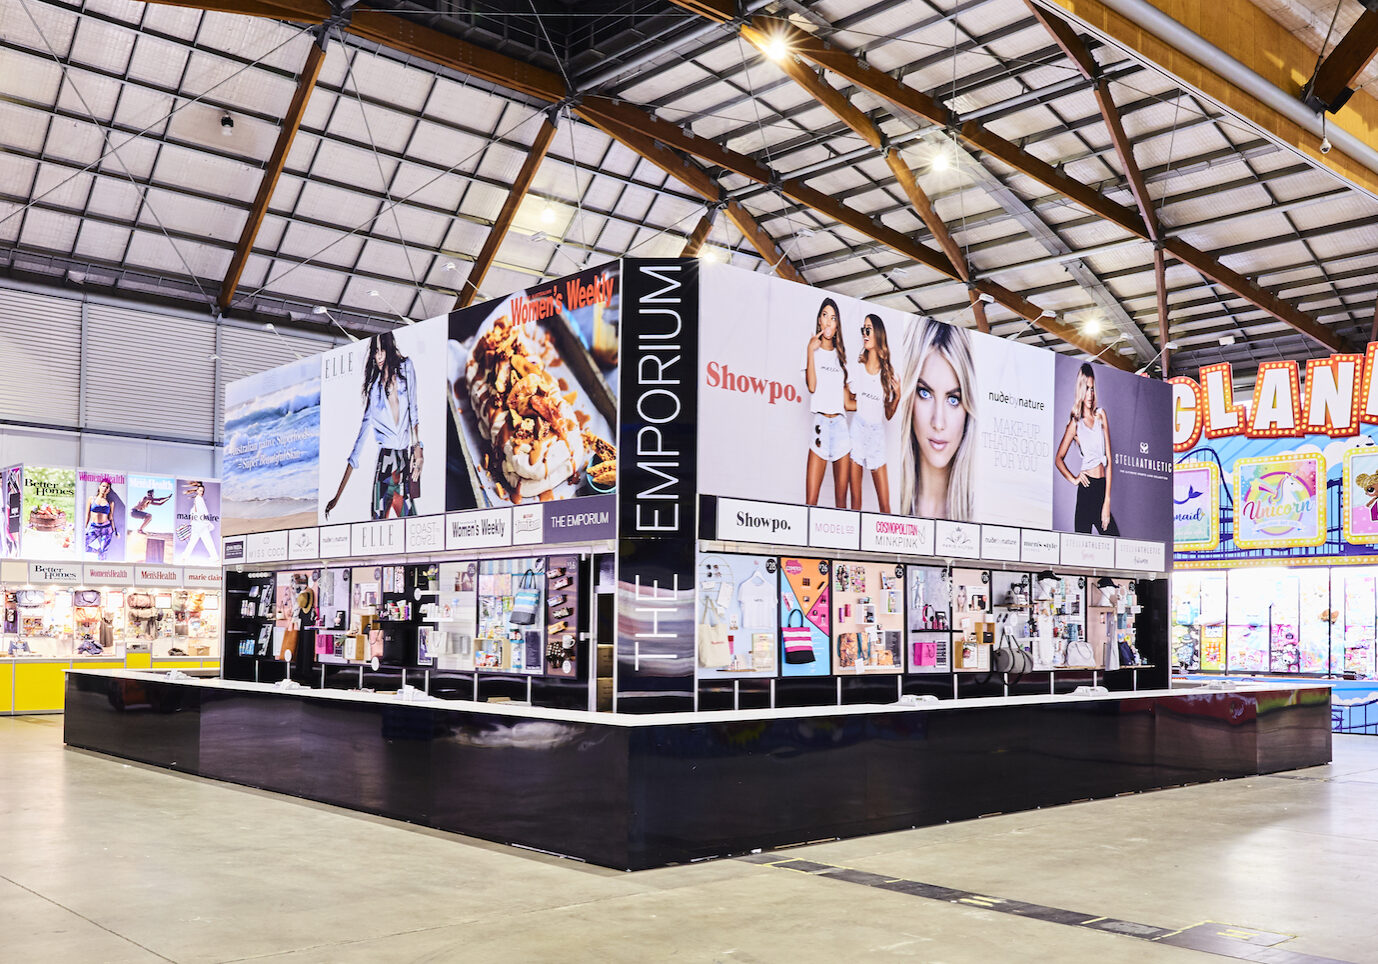 The Emporium, premium Showbag Stand at the Royal Shows retailing the best Style and Fashion, Beauty, Home and Lifestyle Showbags